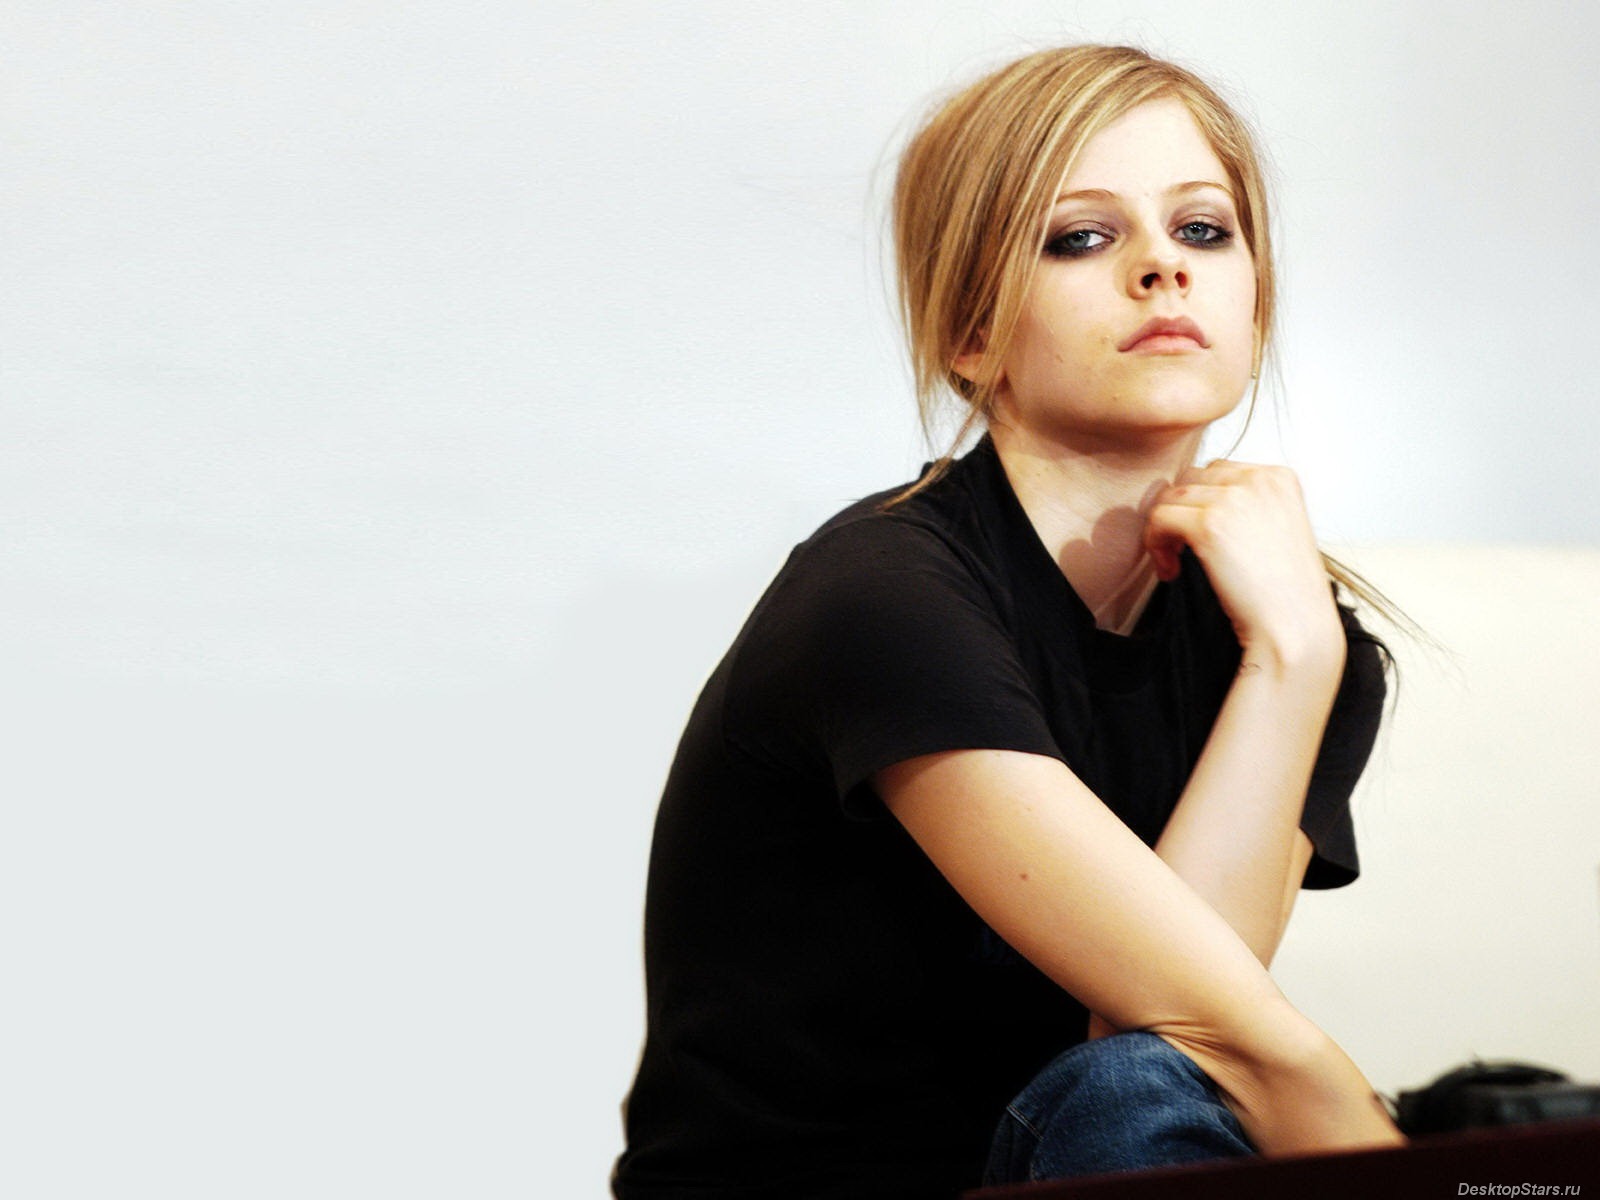 Avril Lavigne #022 - 1600x1200 Wallpapers Pictures Photos Images